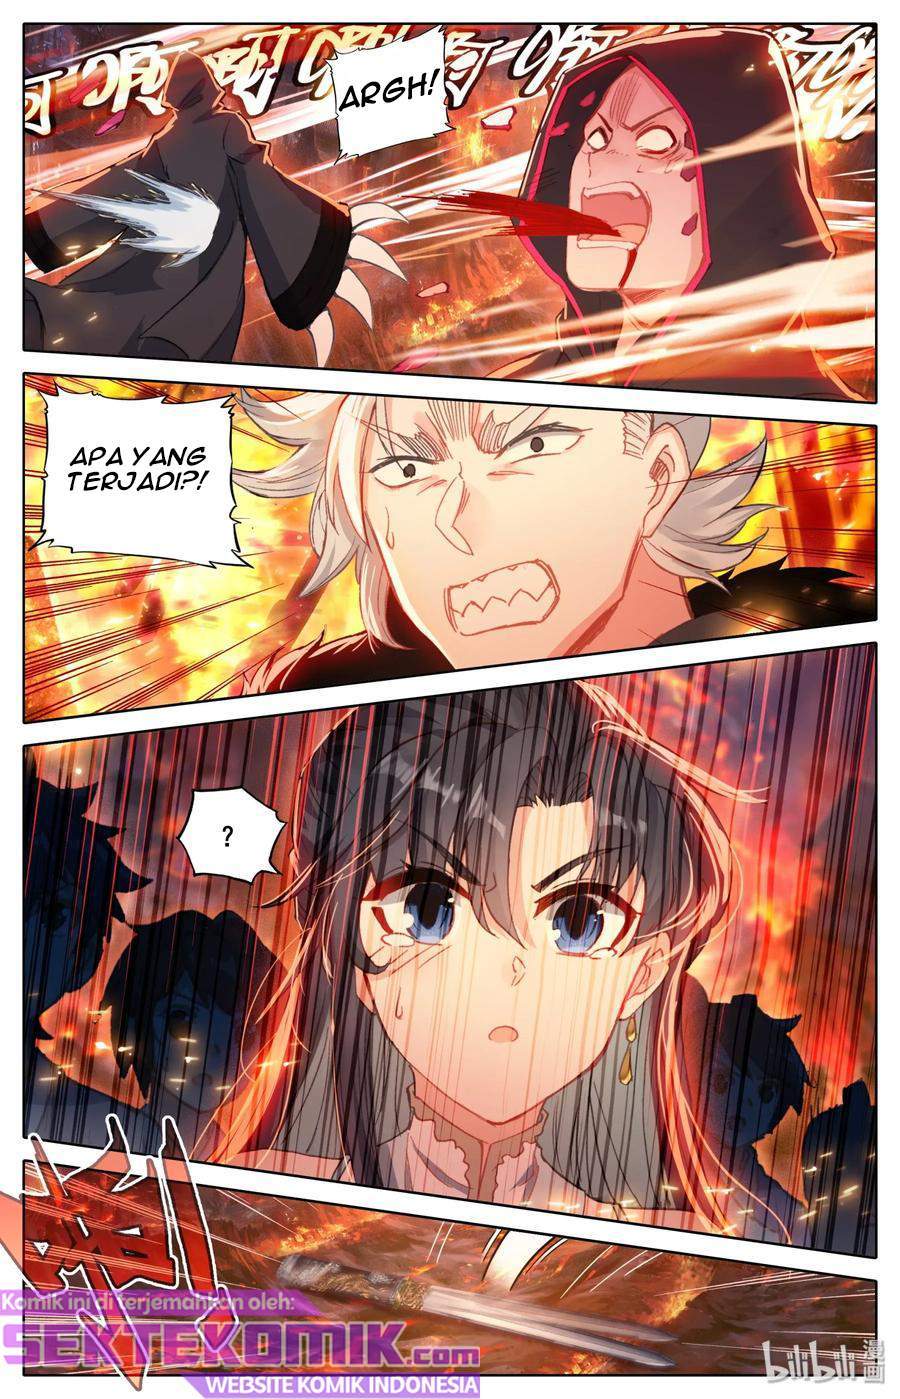 Mortal Cultivation Fairy World Chapter 15